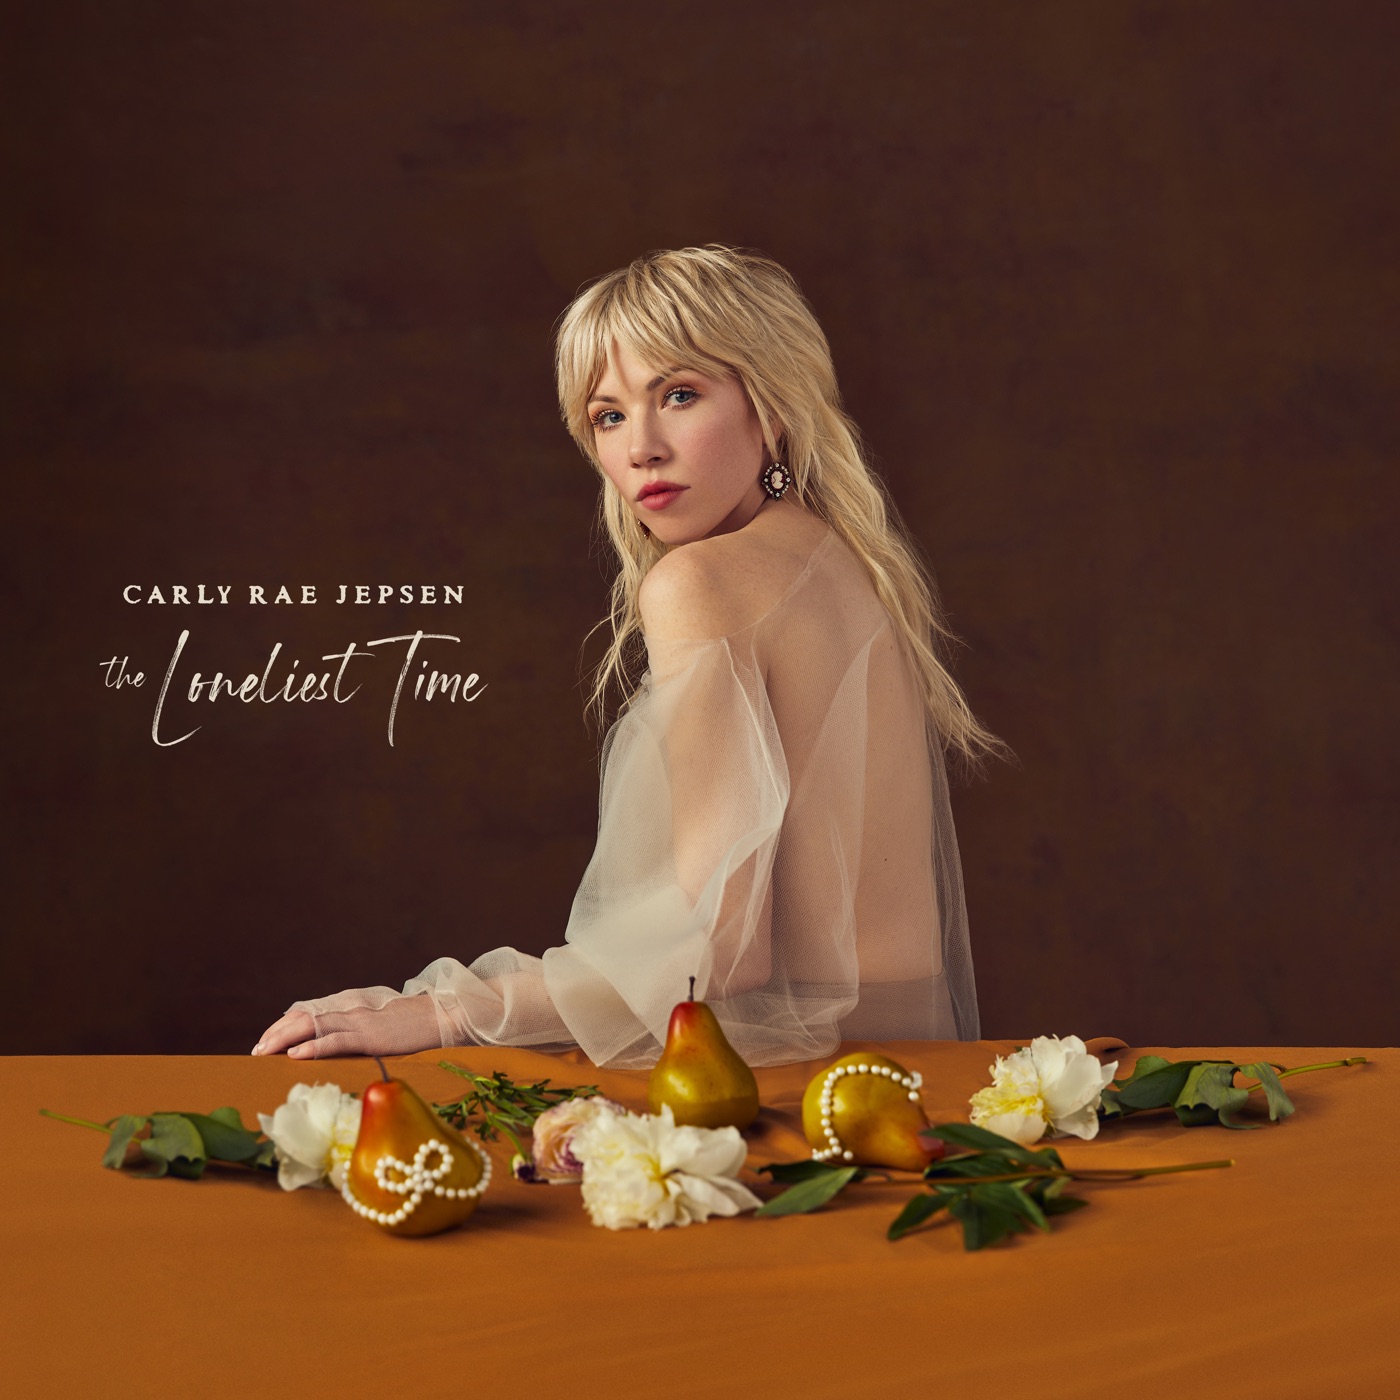 The Loneliest Time by Carly Rae Jepsen, Rufus Wainwright, The Loneliest Time